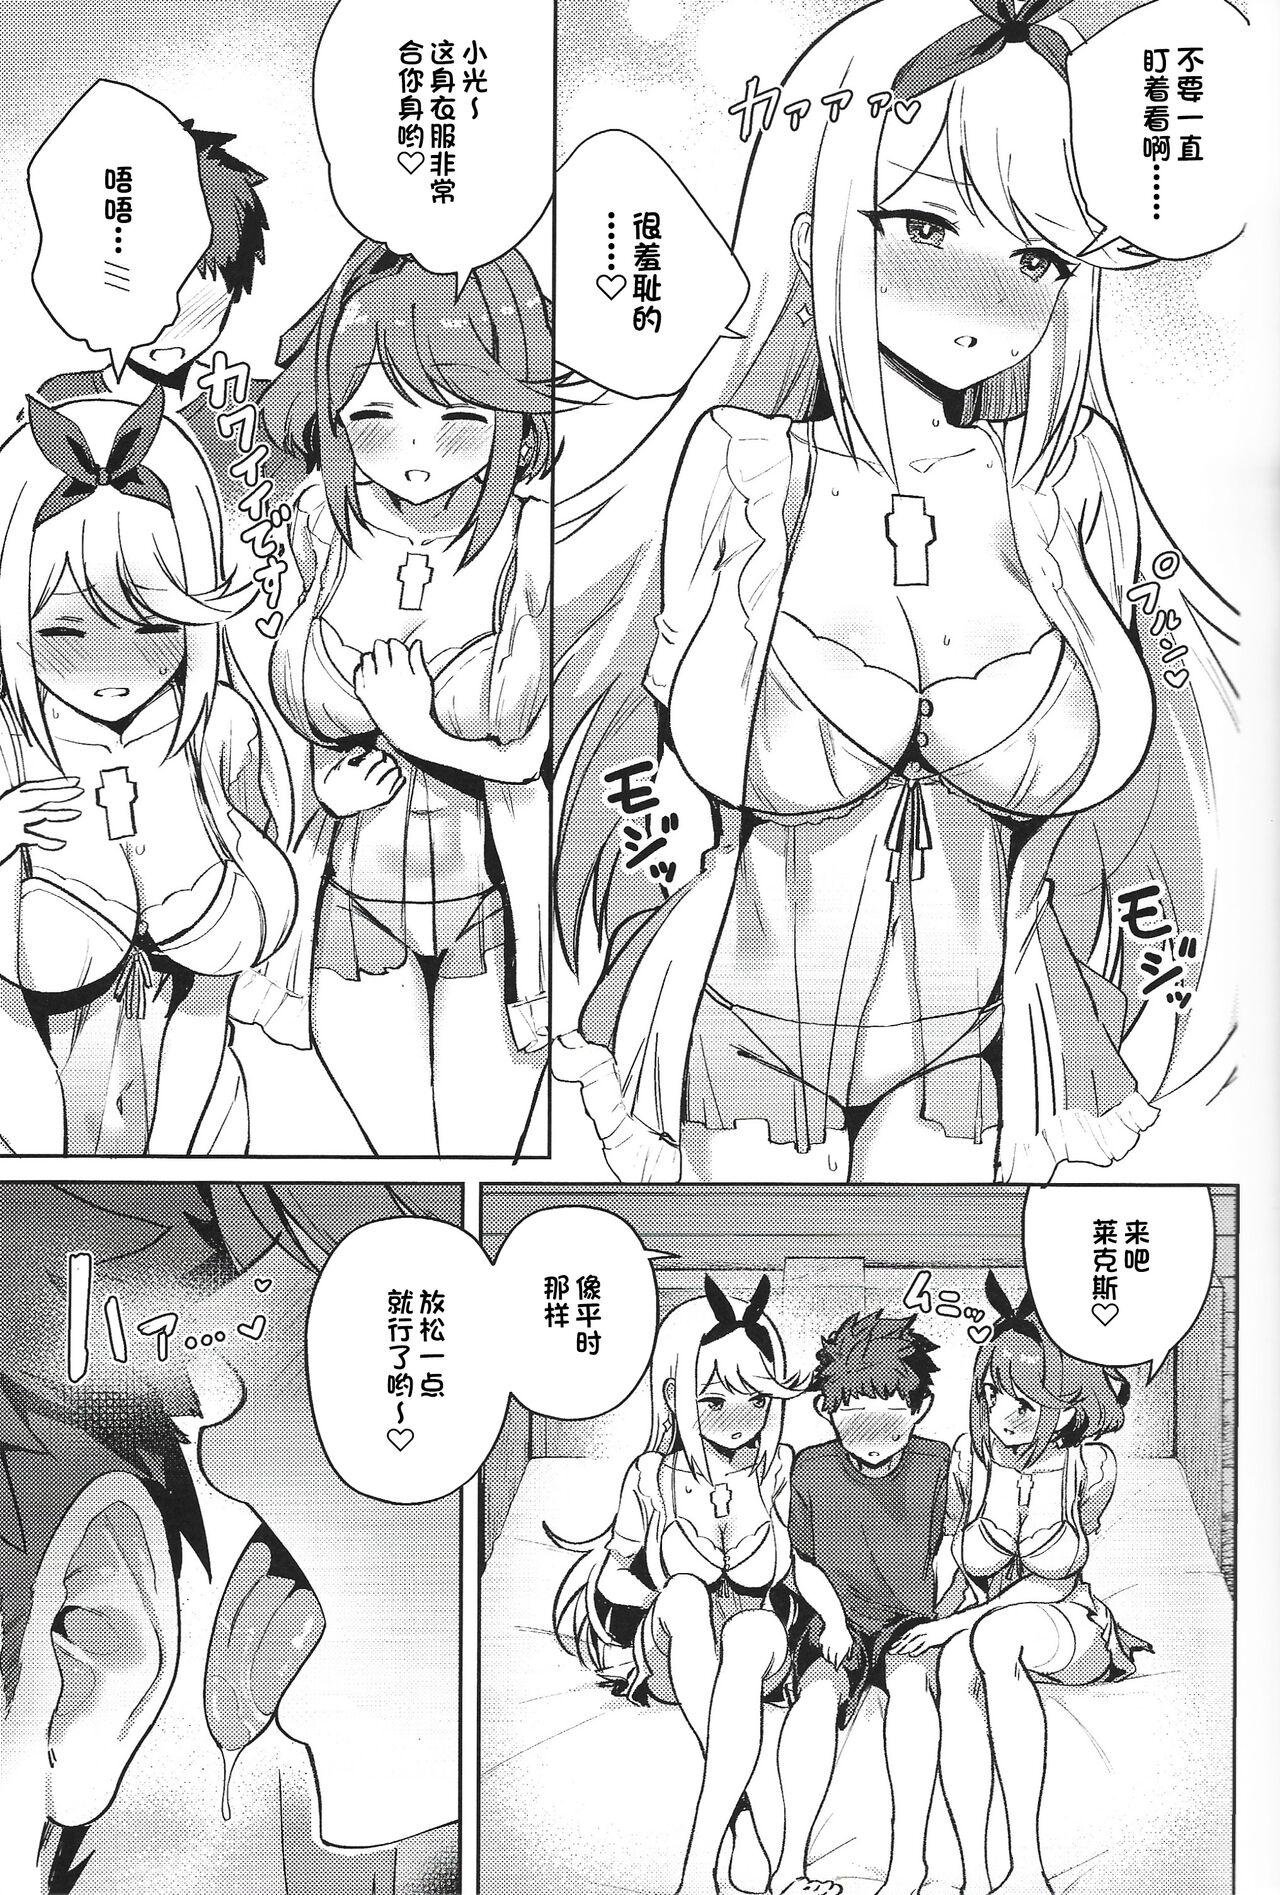 Free Amatuer えっちがしたいヒカリとホムラ - Xenoblade chronicles 2 Lovers - Page 8